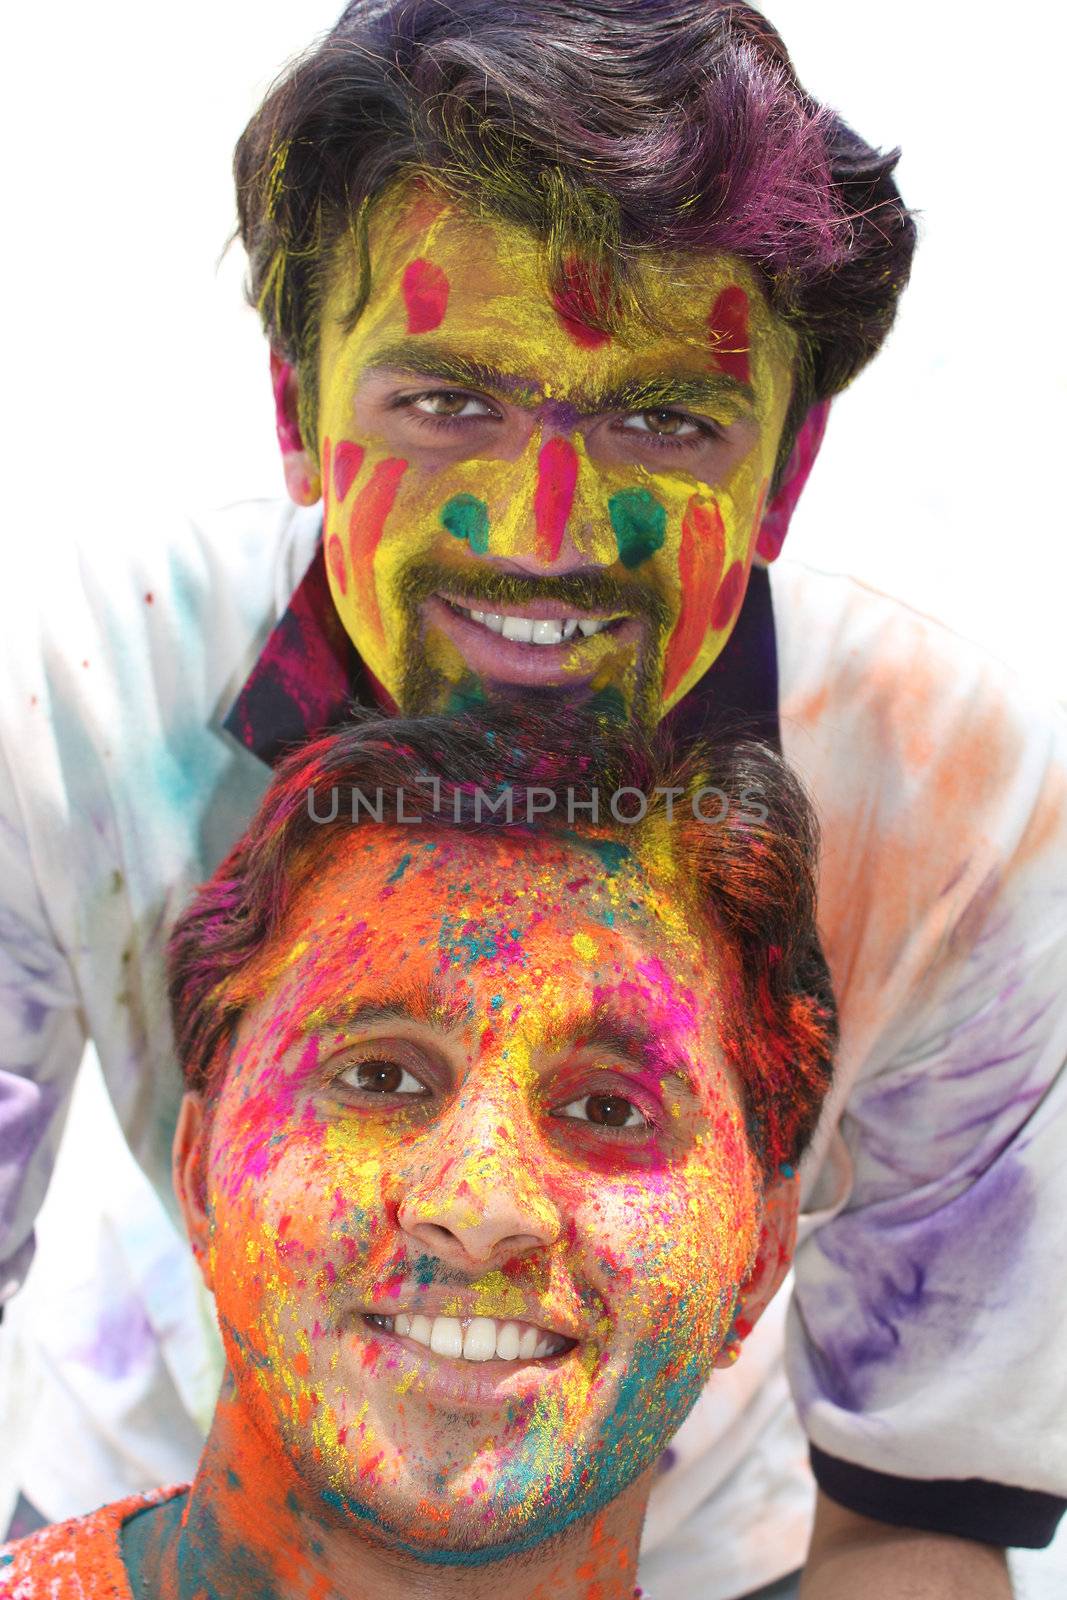 Two young guys with their faces tradiitionally painted in colorful powders, on the occasion of holi festival in India.